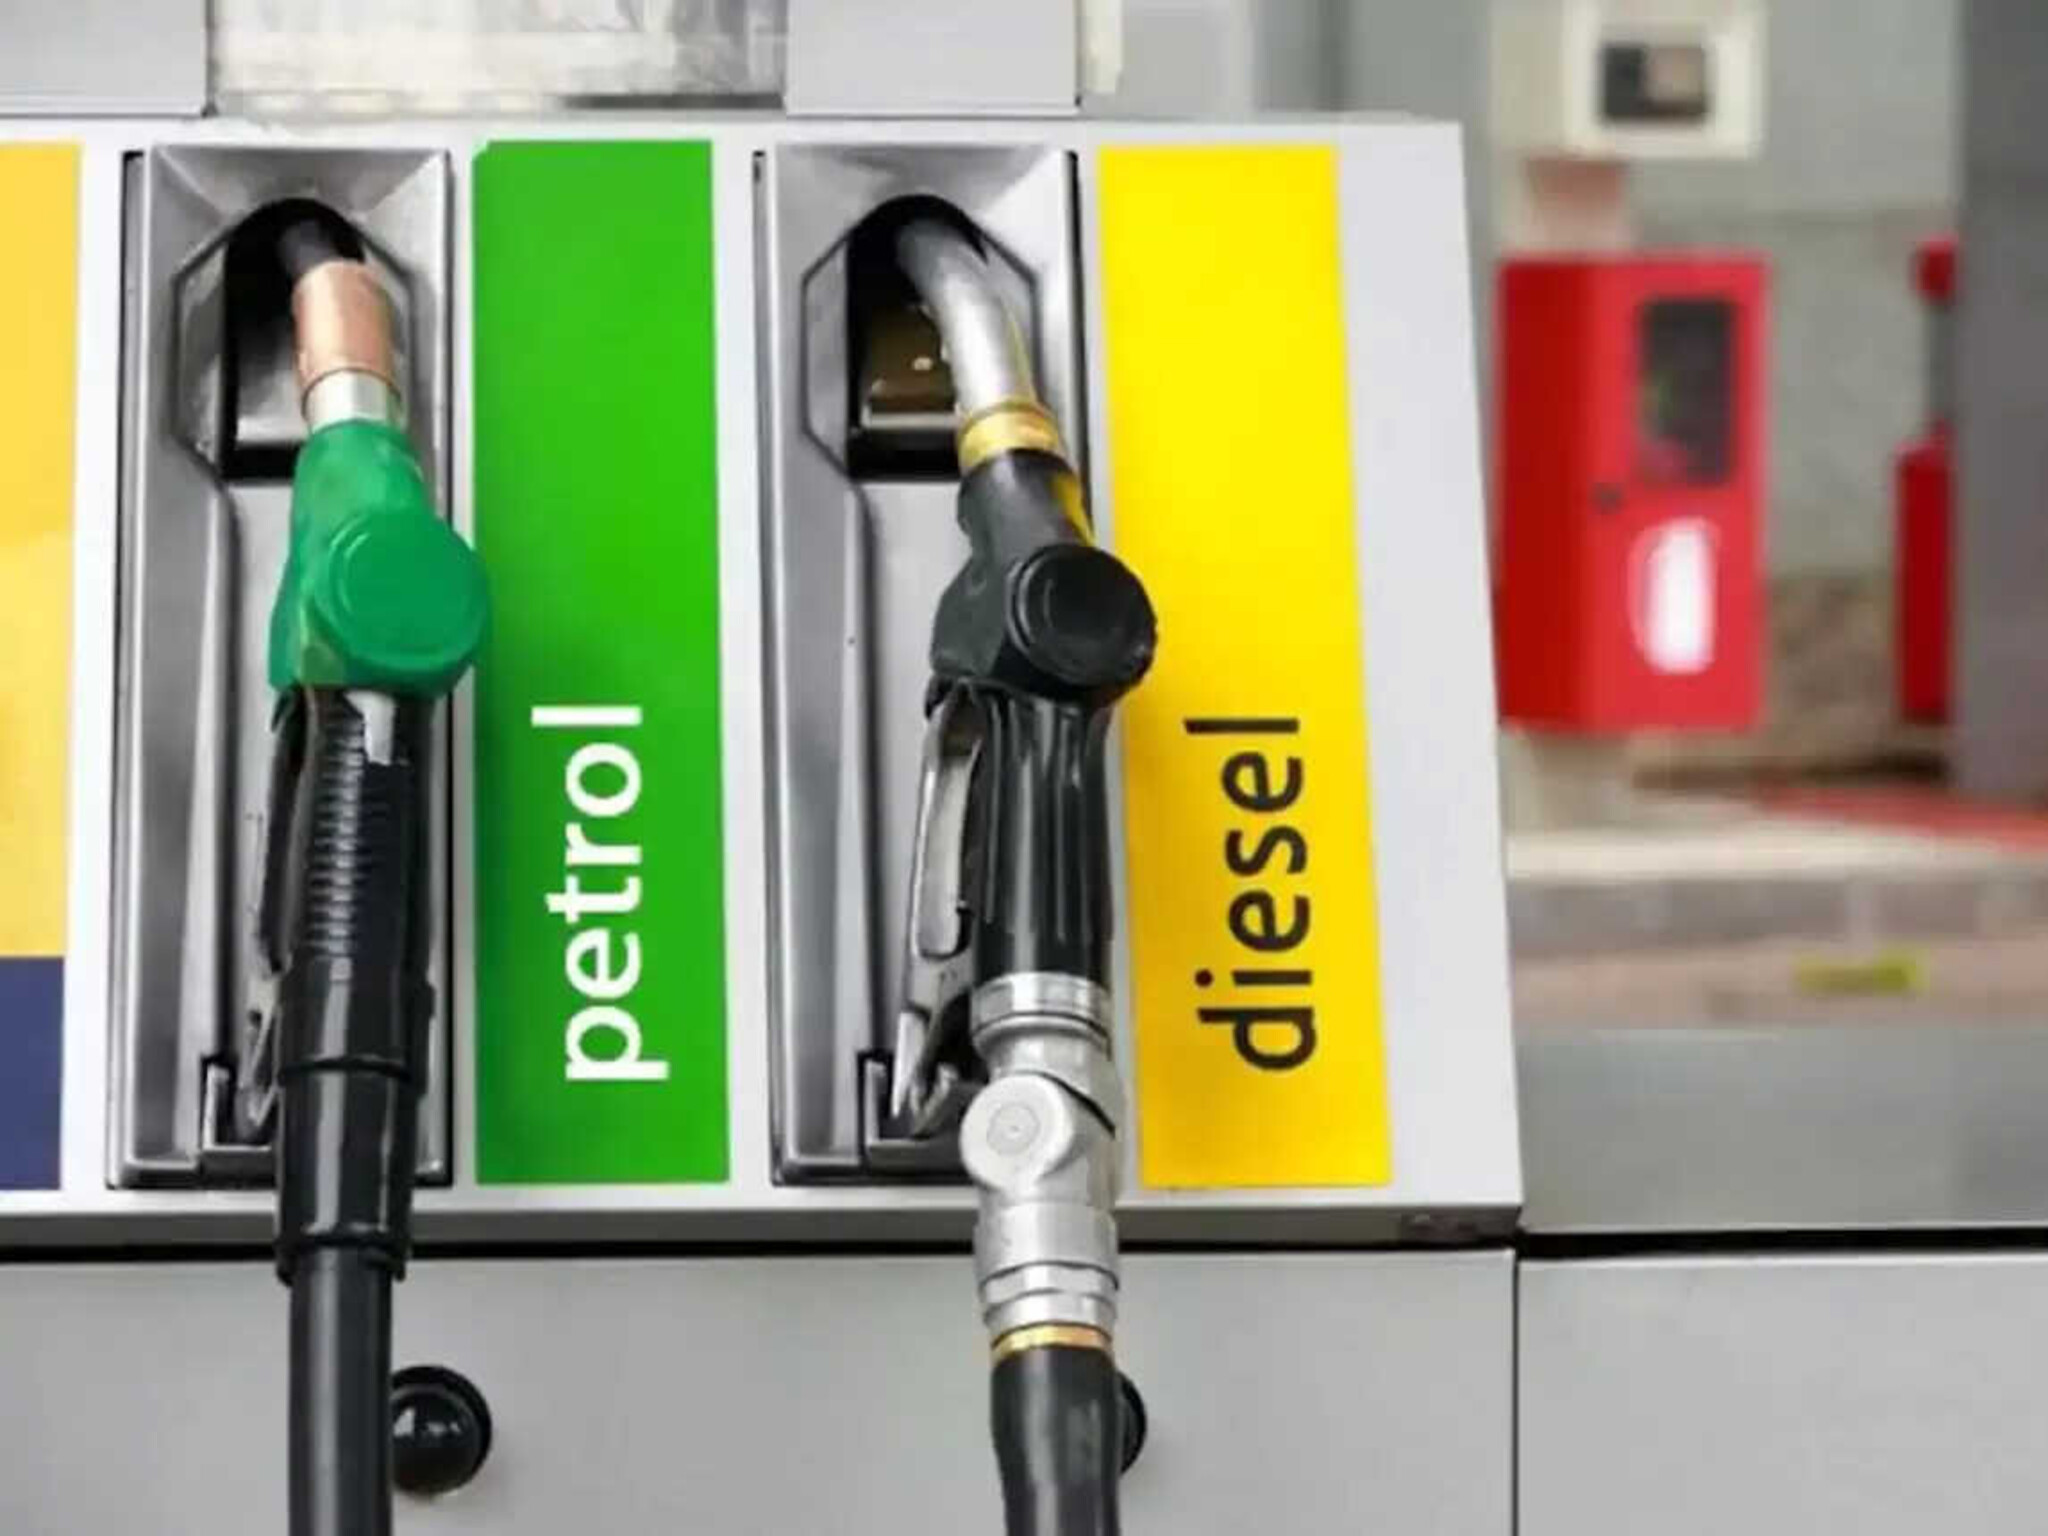 The Price Control Committee announces an increase in fuel prices in the UAE for the month of May